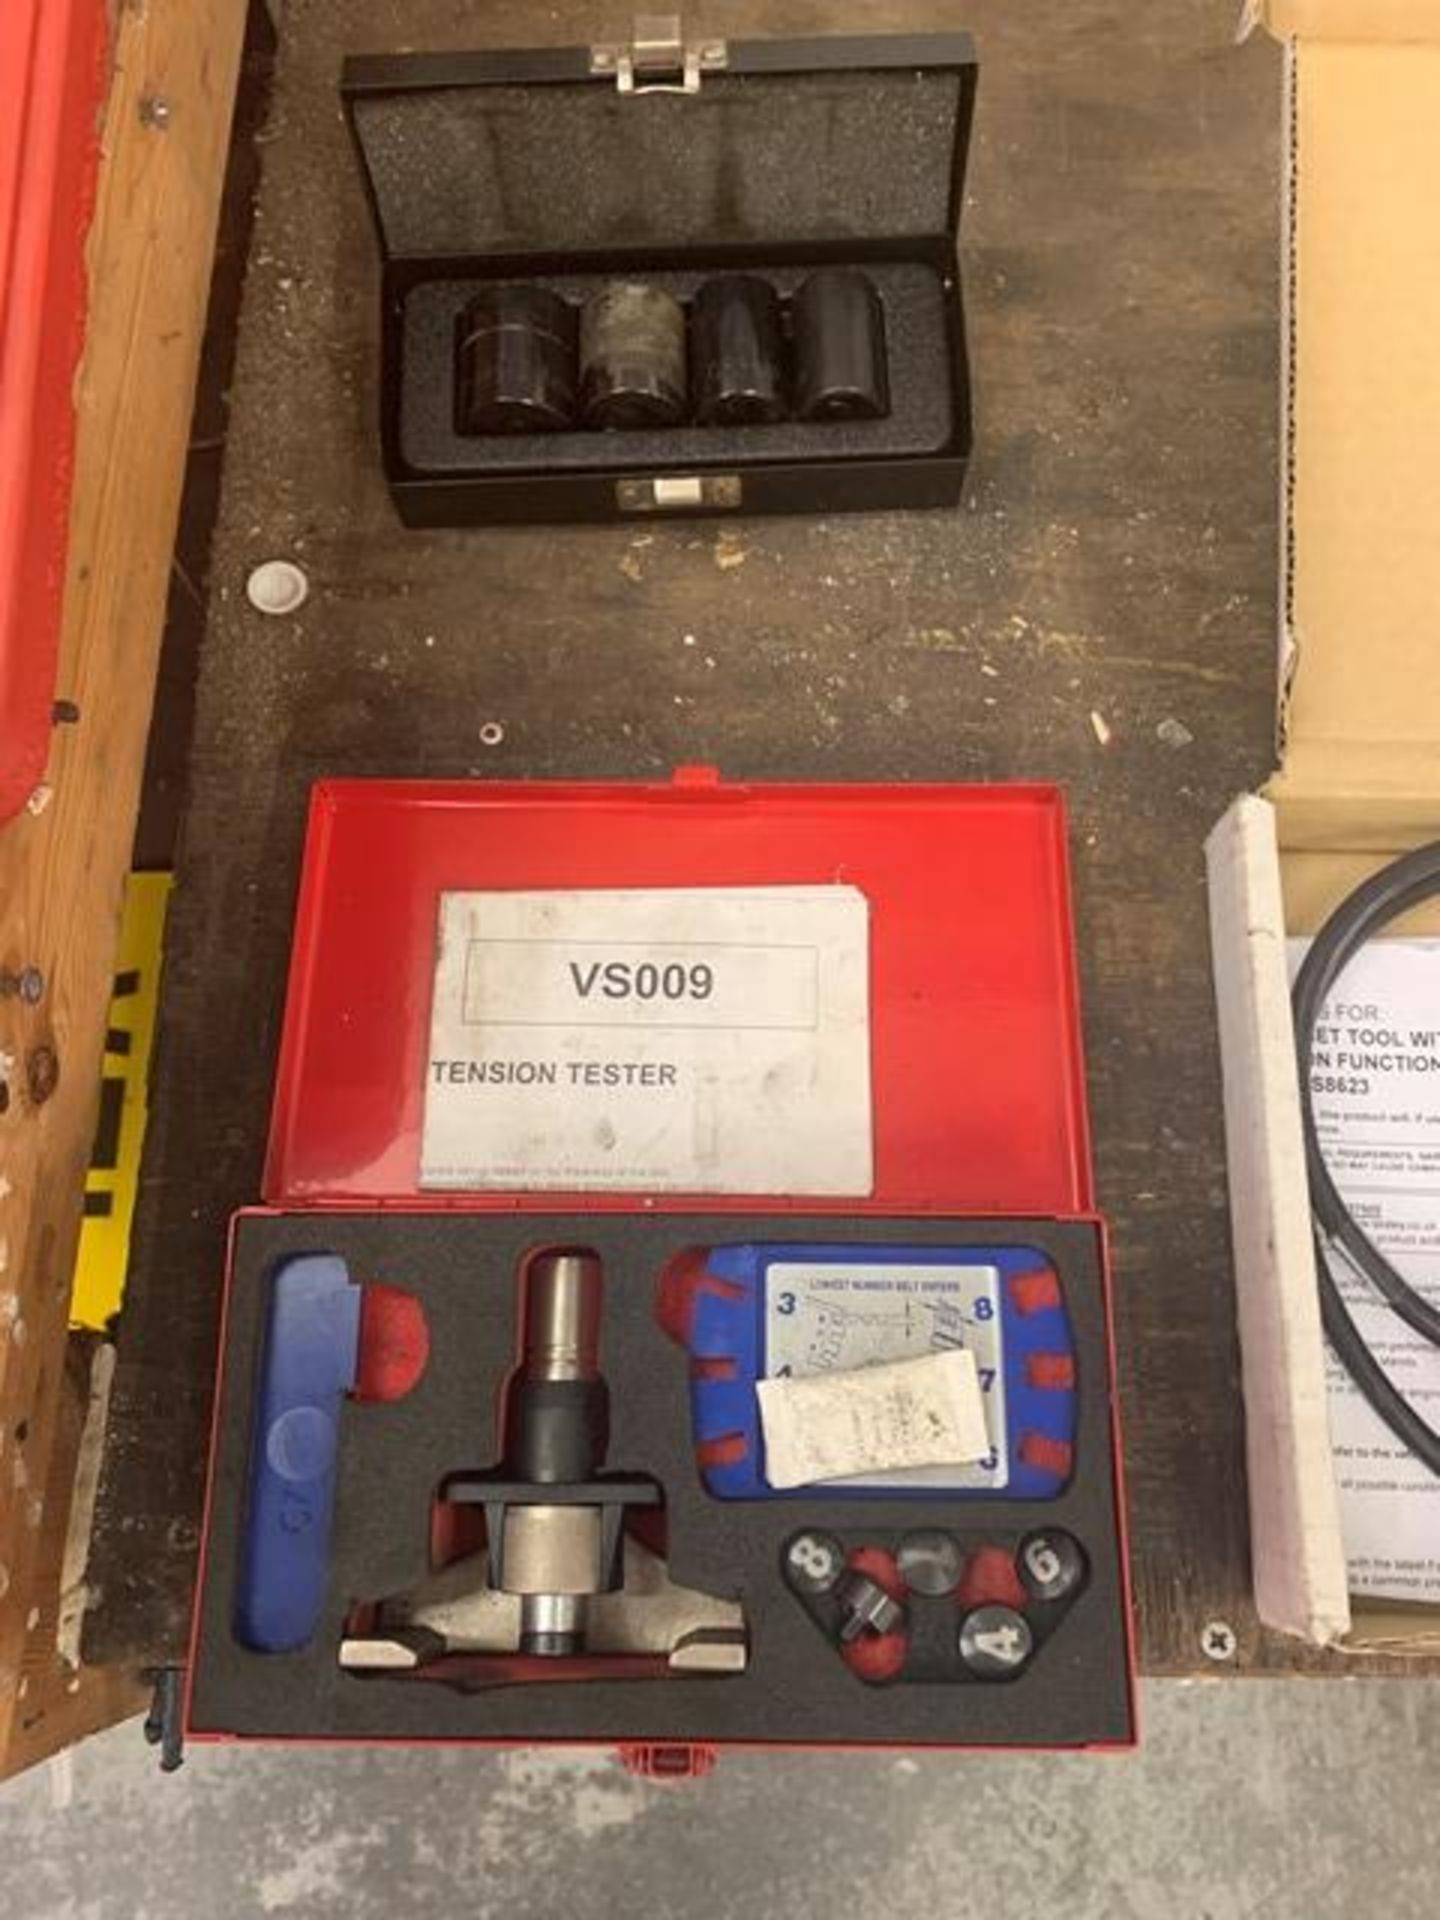 As lotted the table: Tension tester, Sealey service reset OBDI tool, Autel VAG, CR-Pro, Creader OBDI - Image 7 of 7